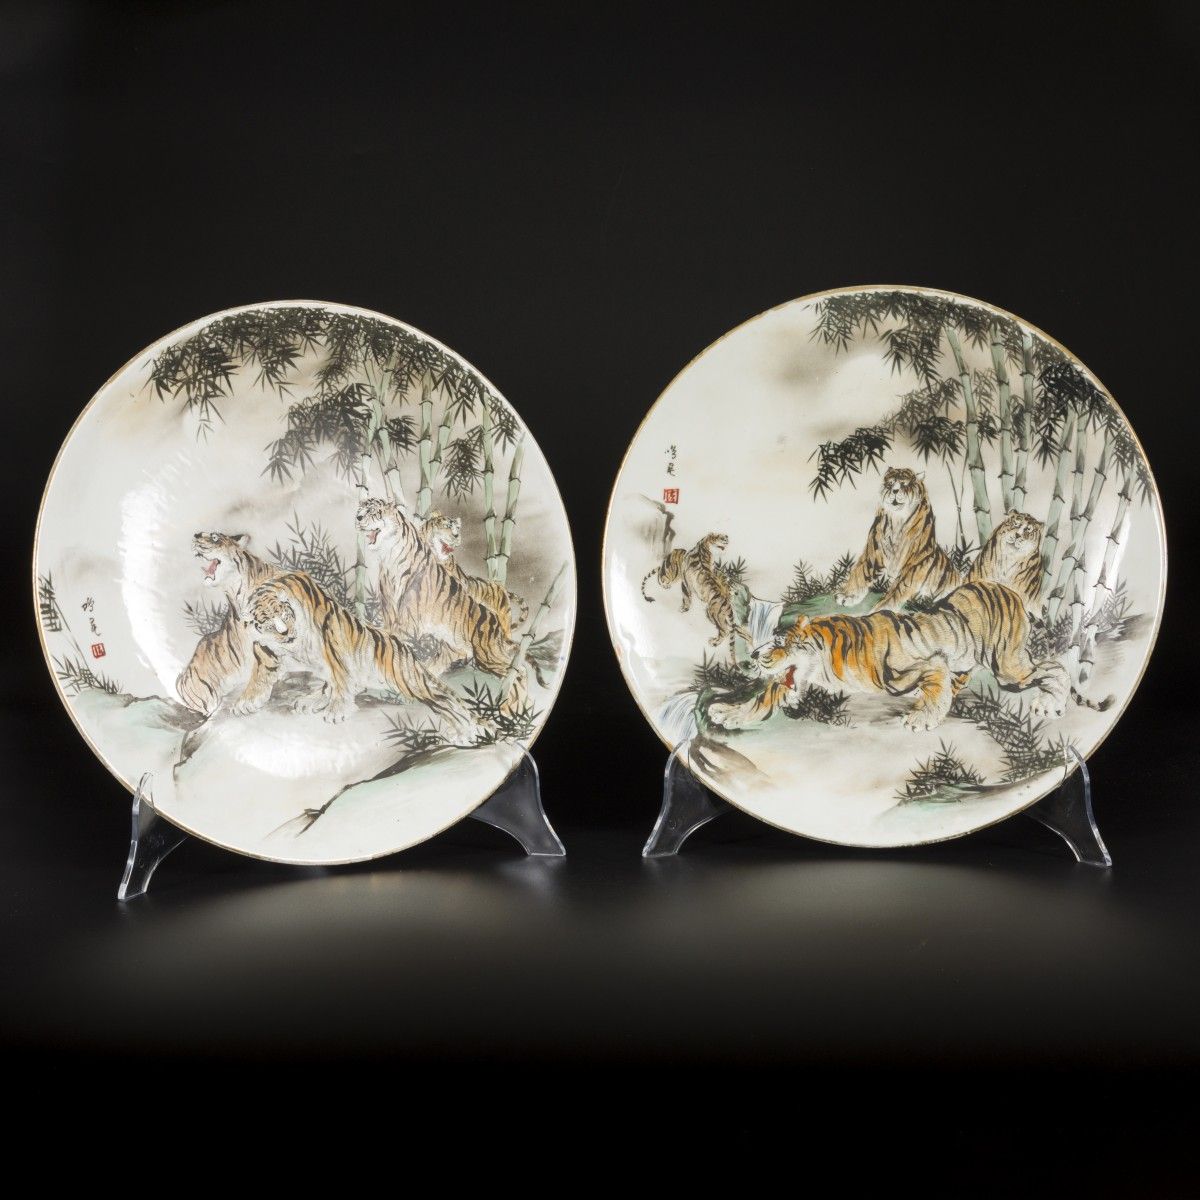 A set of (2) porcelain chargers decorated with tigers, Japan, 19th century. Durc&hellip;